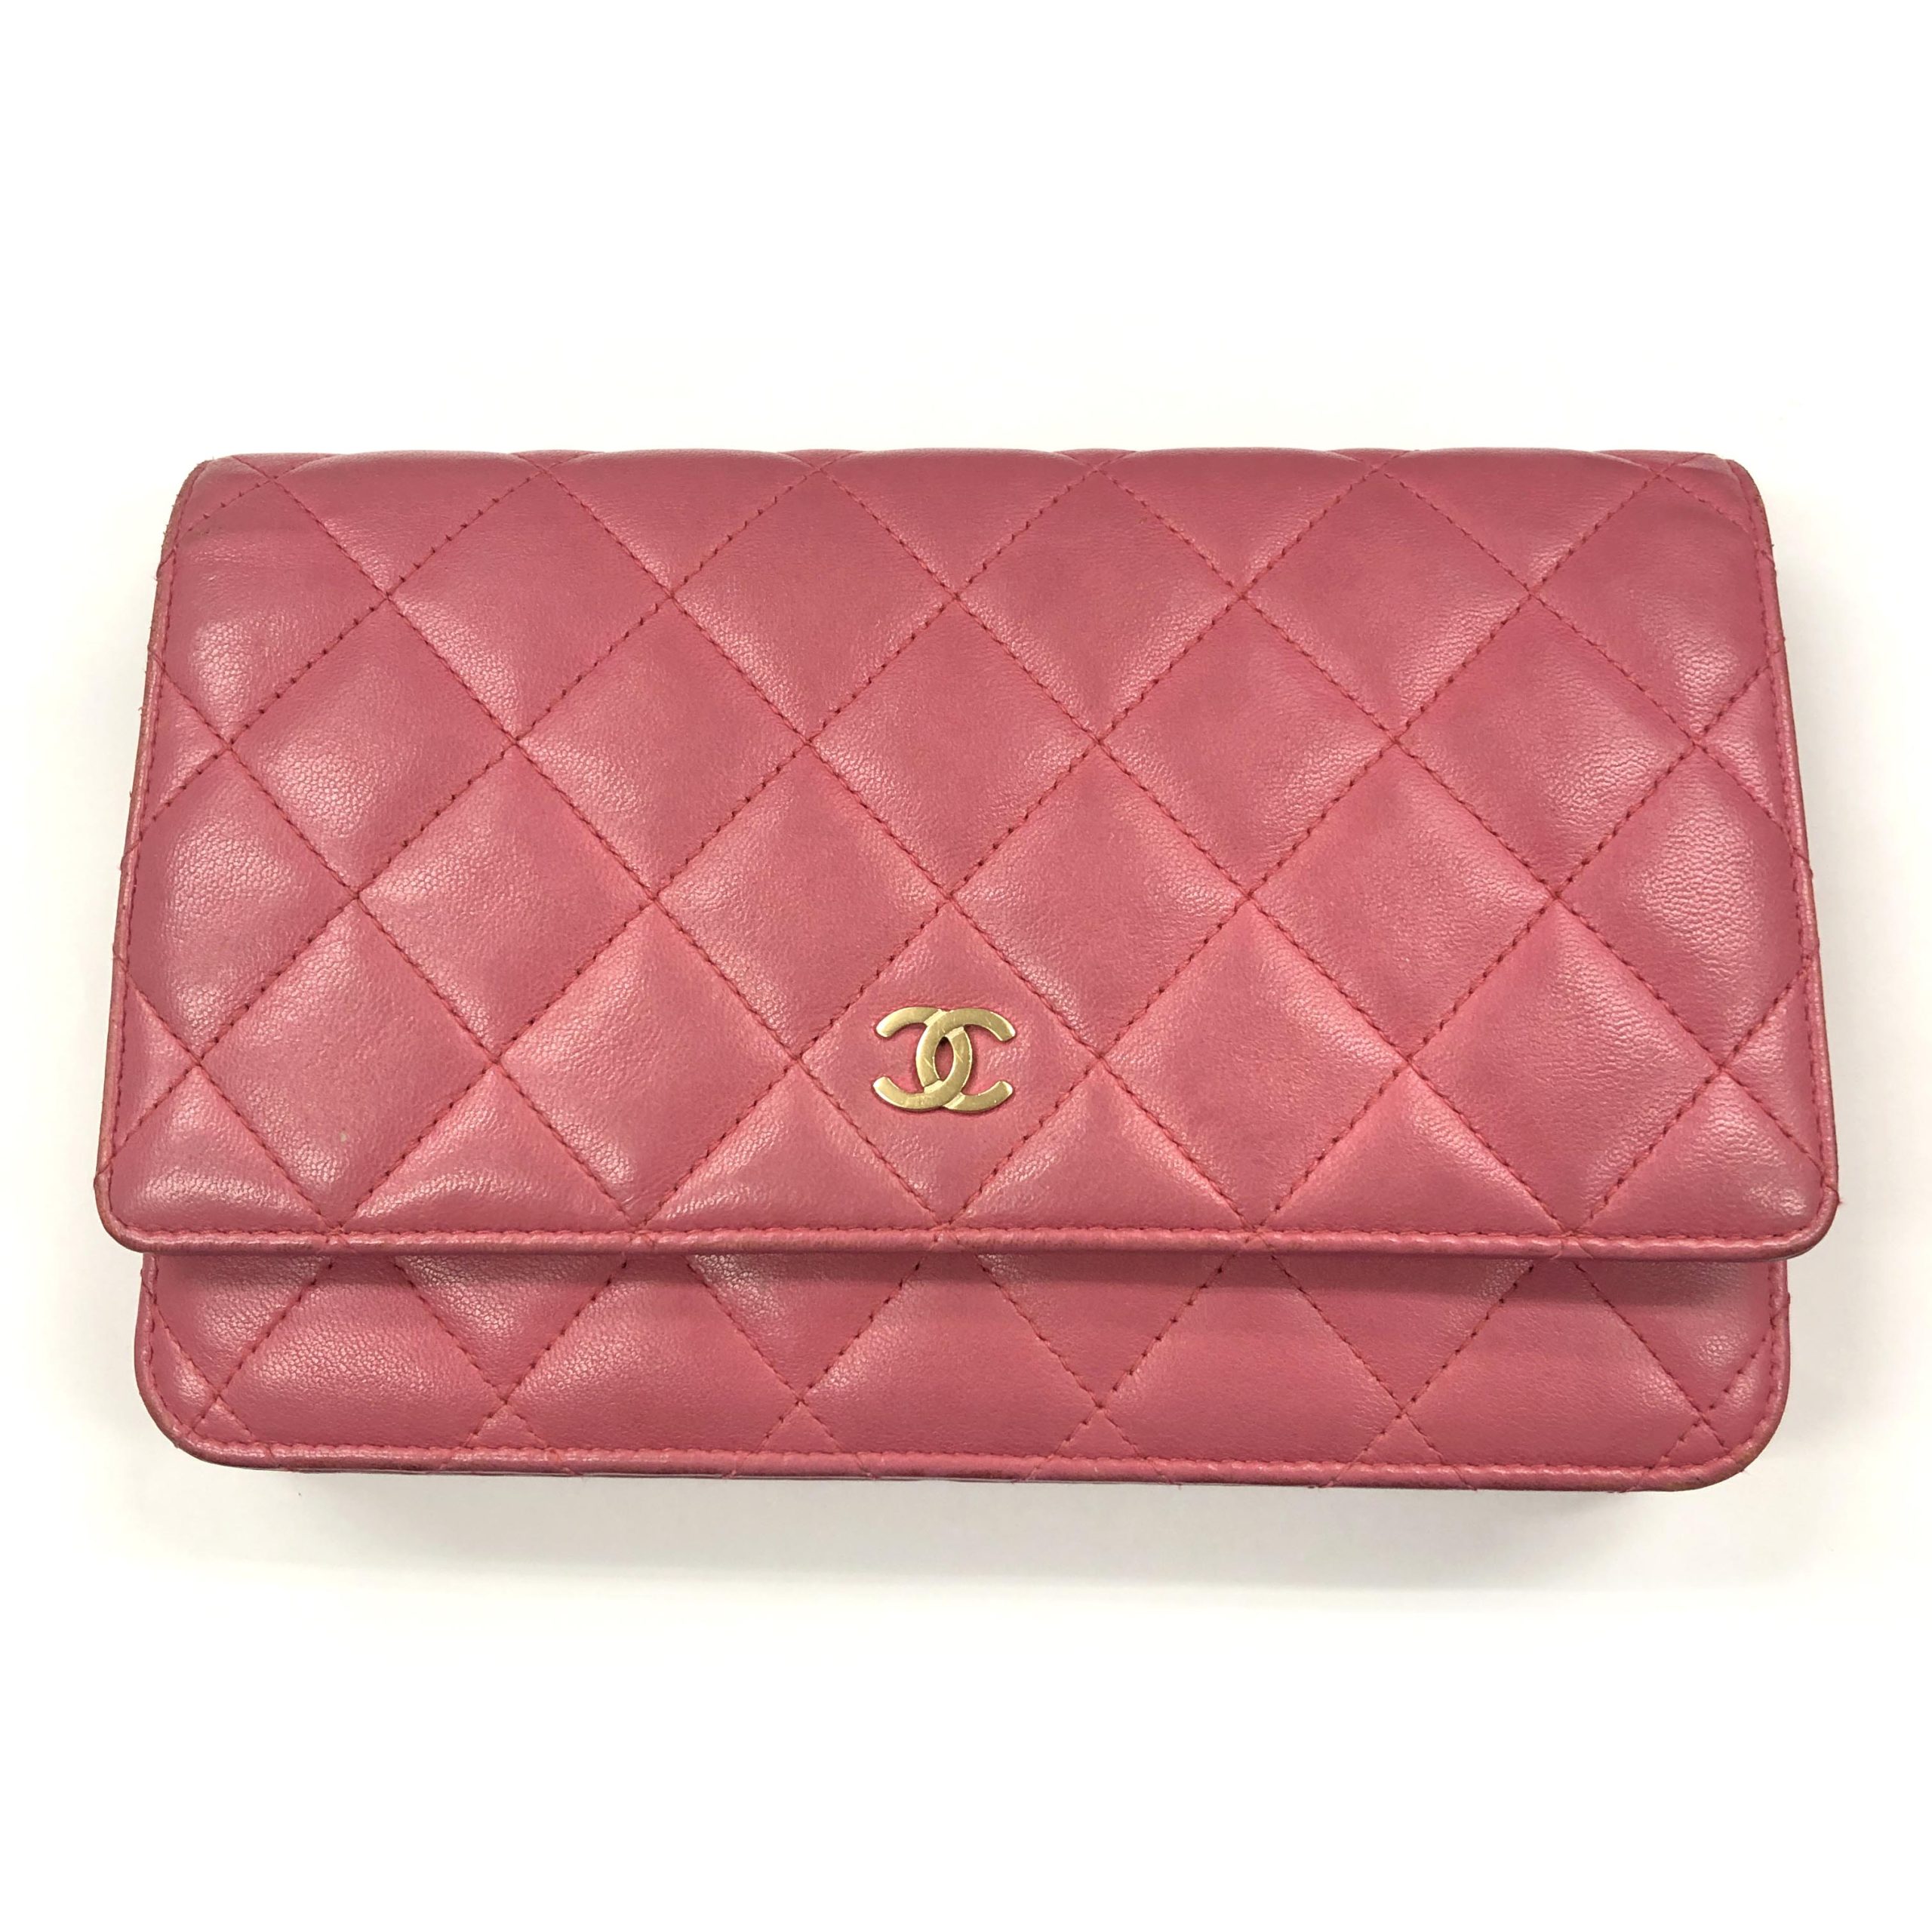 You are currently viewing CHANEL Matelasse/Lambskin Chain Shoulder Wallet